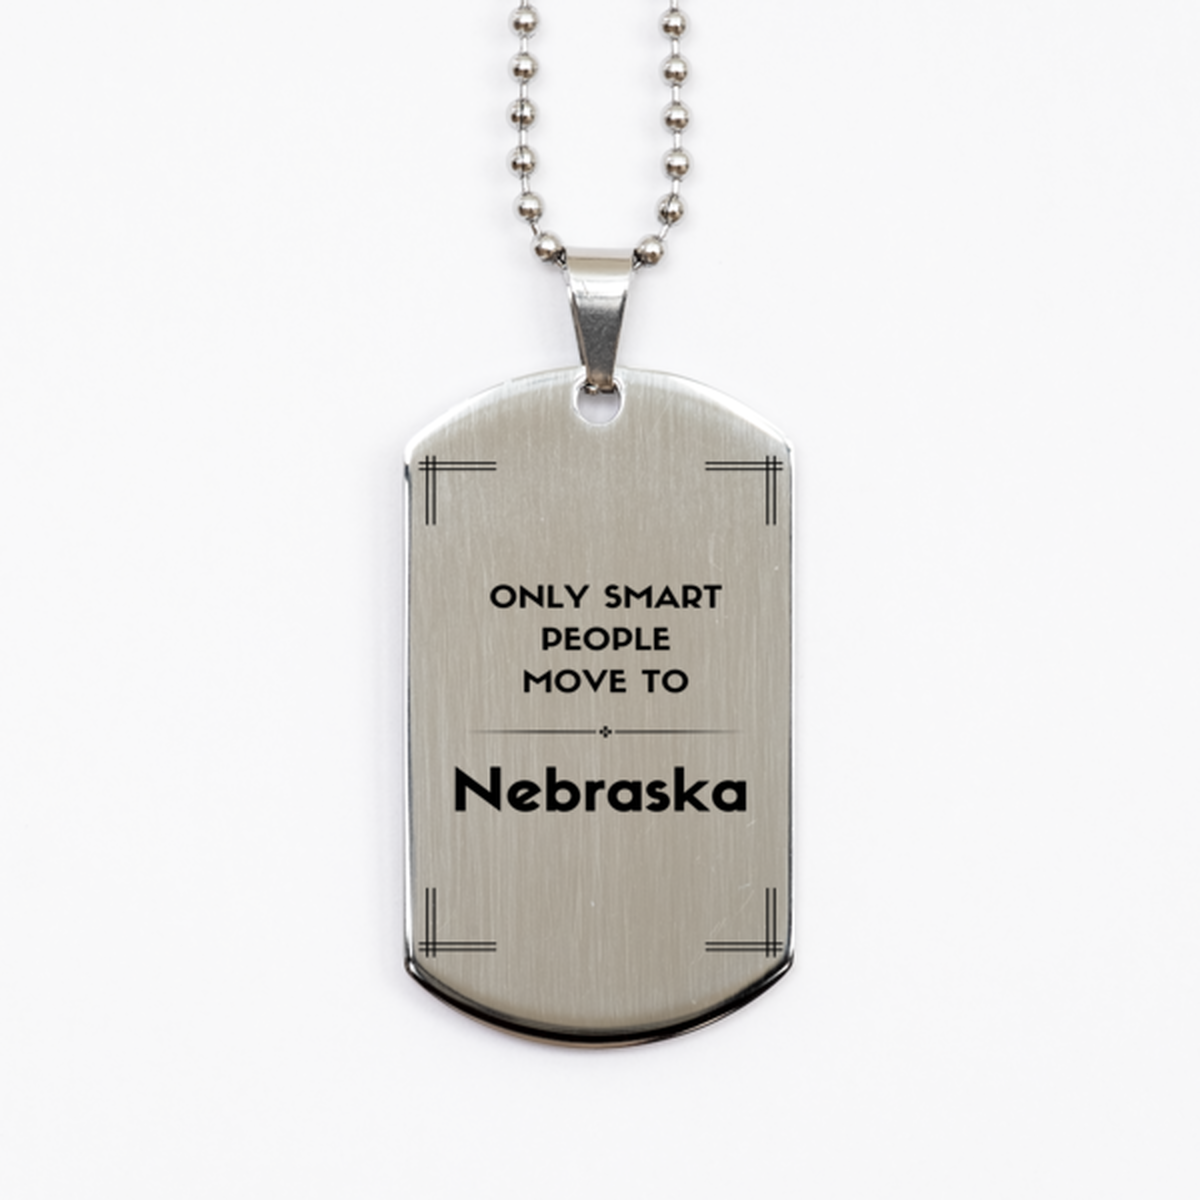 Only smart people move to Nebraska Silver Dog Tag, Gag Gifts For Nebraska, Move to Nebraska Gifts for Friends Coworker Funny Saying Quote